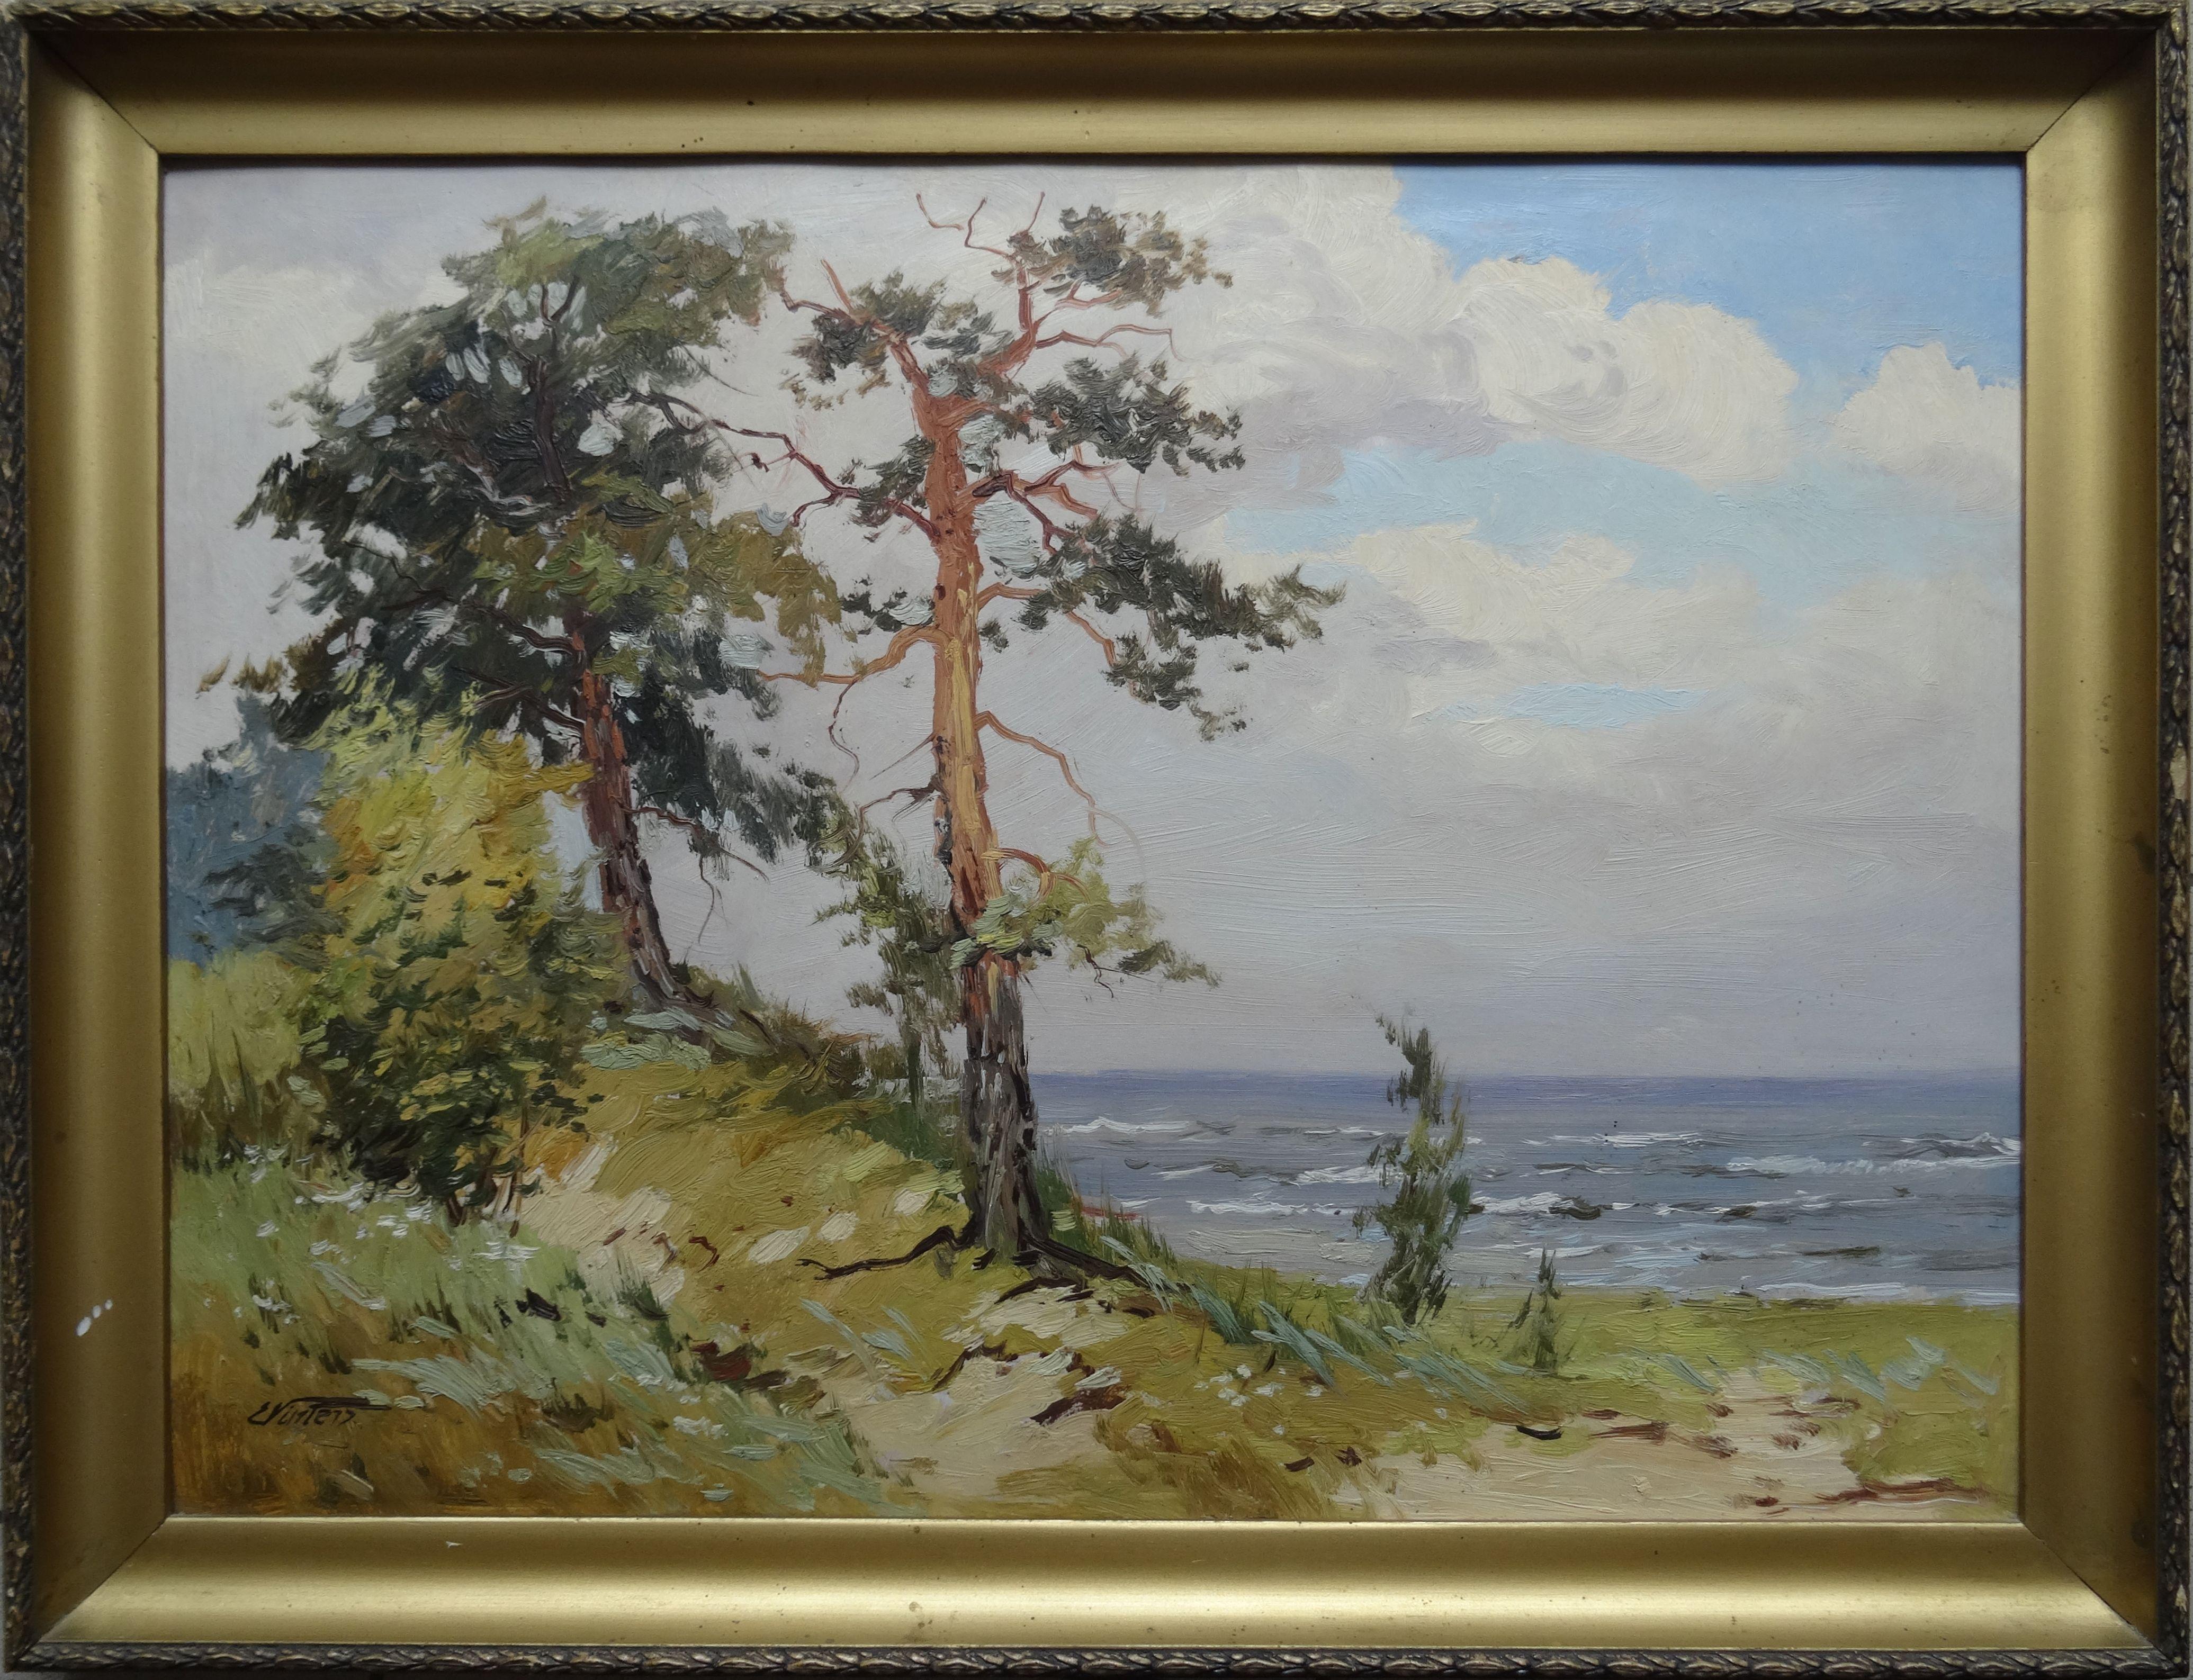 Landscape by the sea. 1950. Oil on cardboard, 44x60 cm - Art by Edgars Vinters